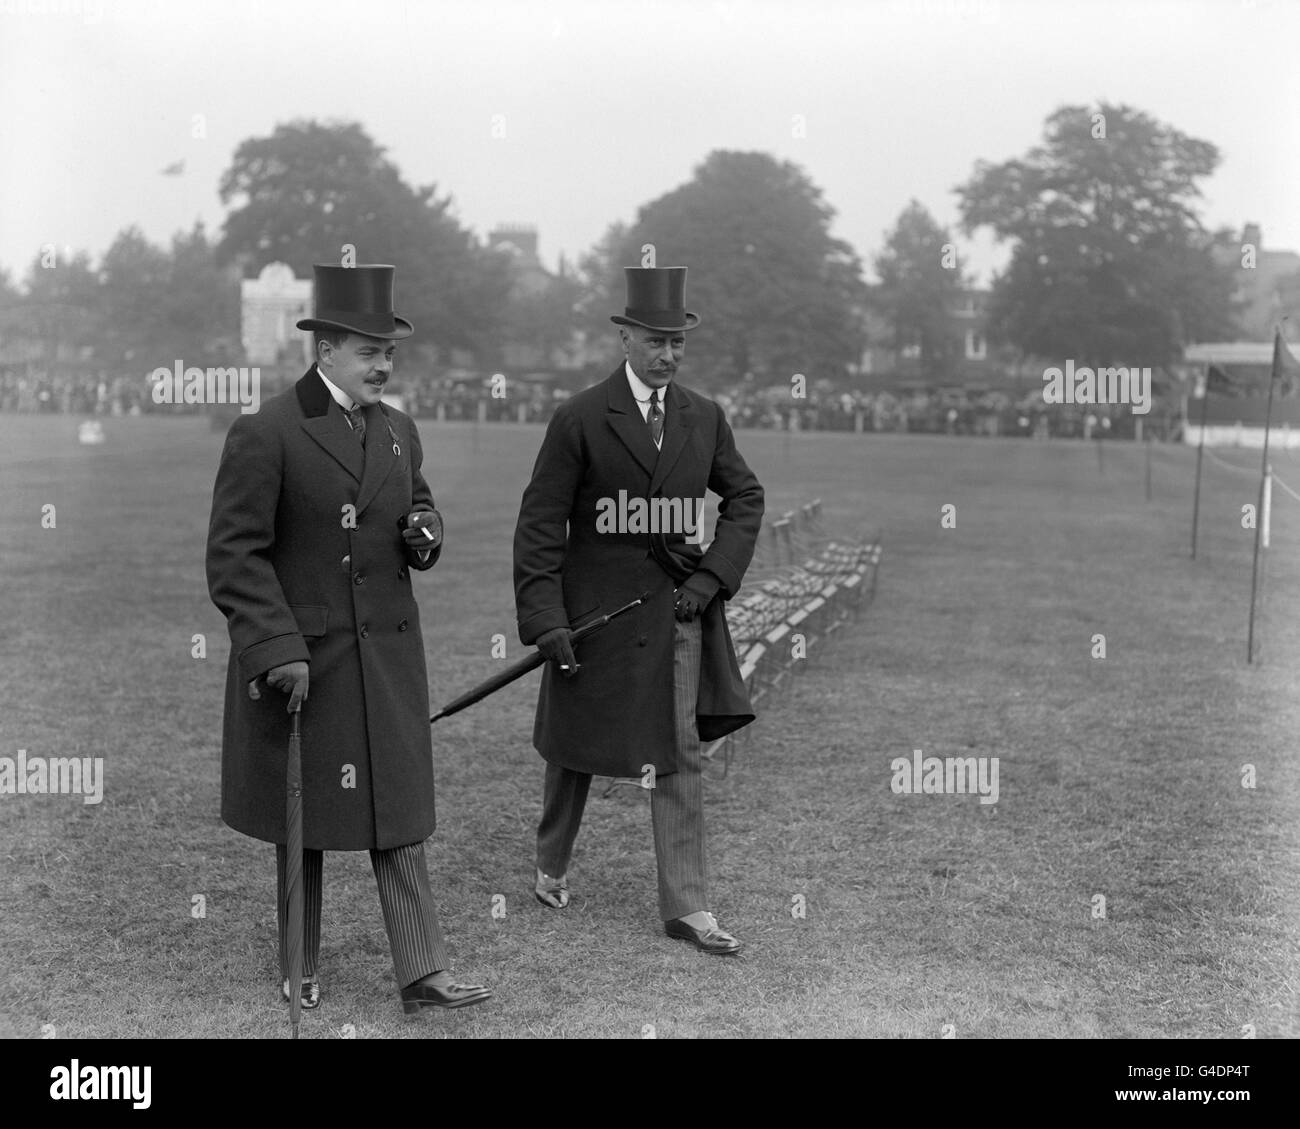 King Manuel II of Portugal (l) and the Earl of Athlone attend the Richmond Royal Horse Show Stock Photo